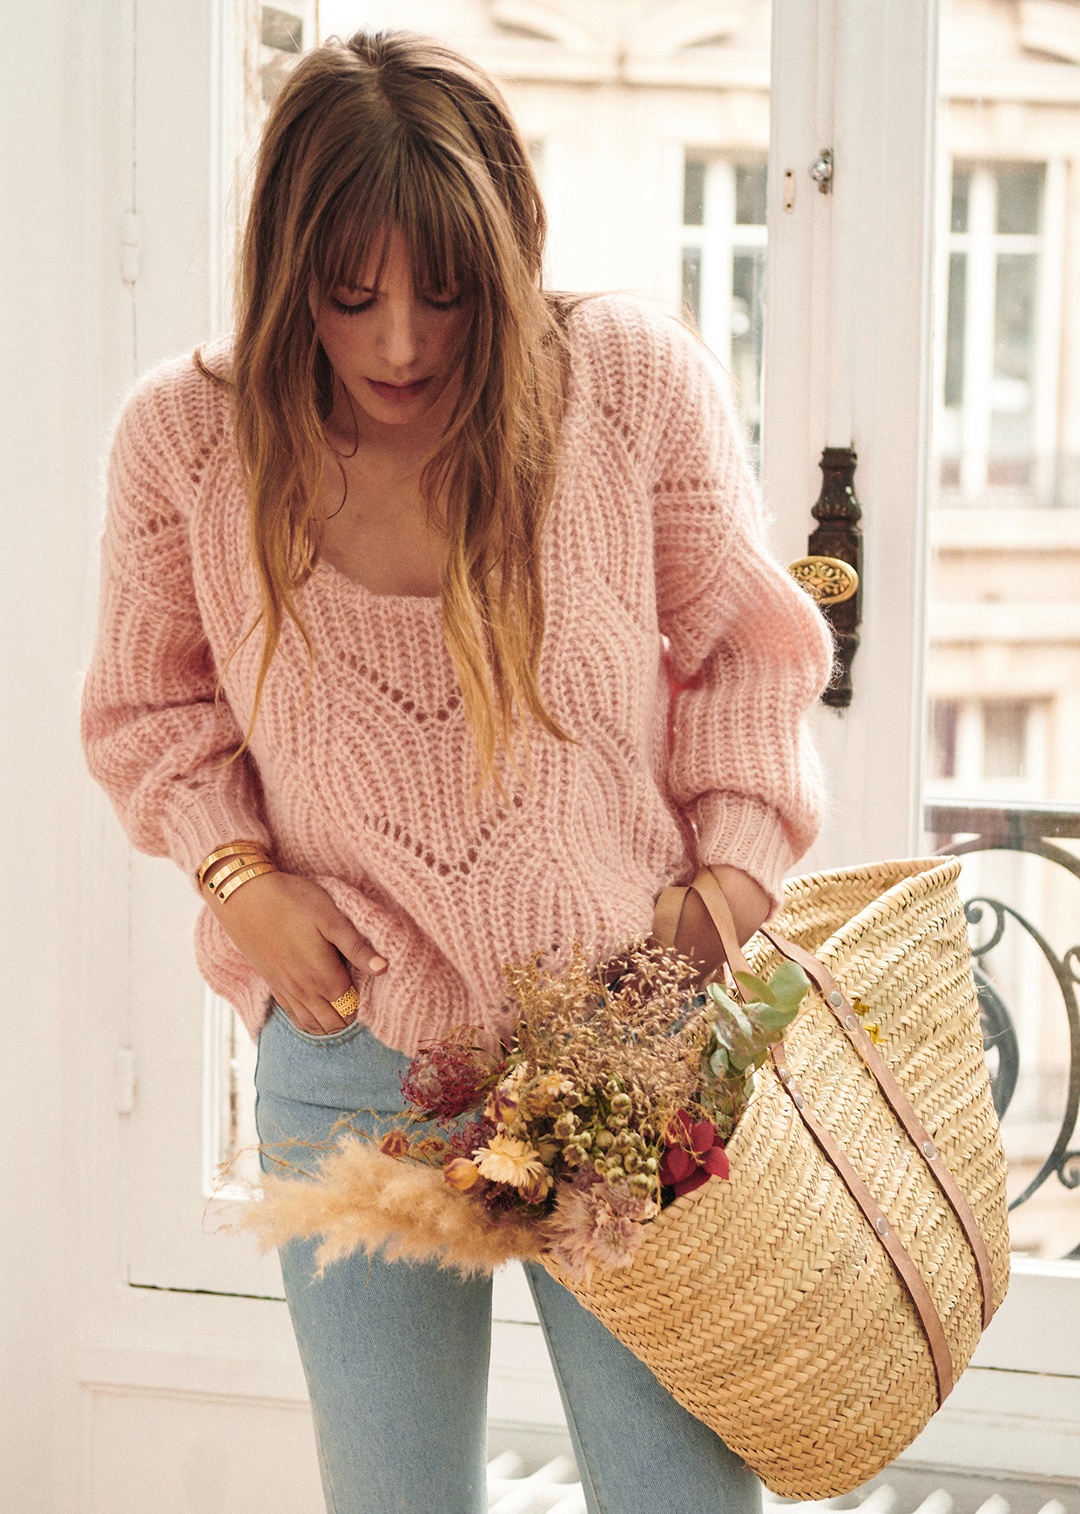 Sweater Weather: Cozy Knits For Every Budget | Kayla Lynn